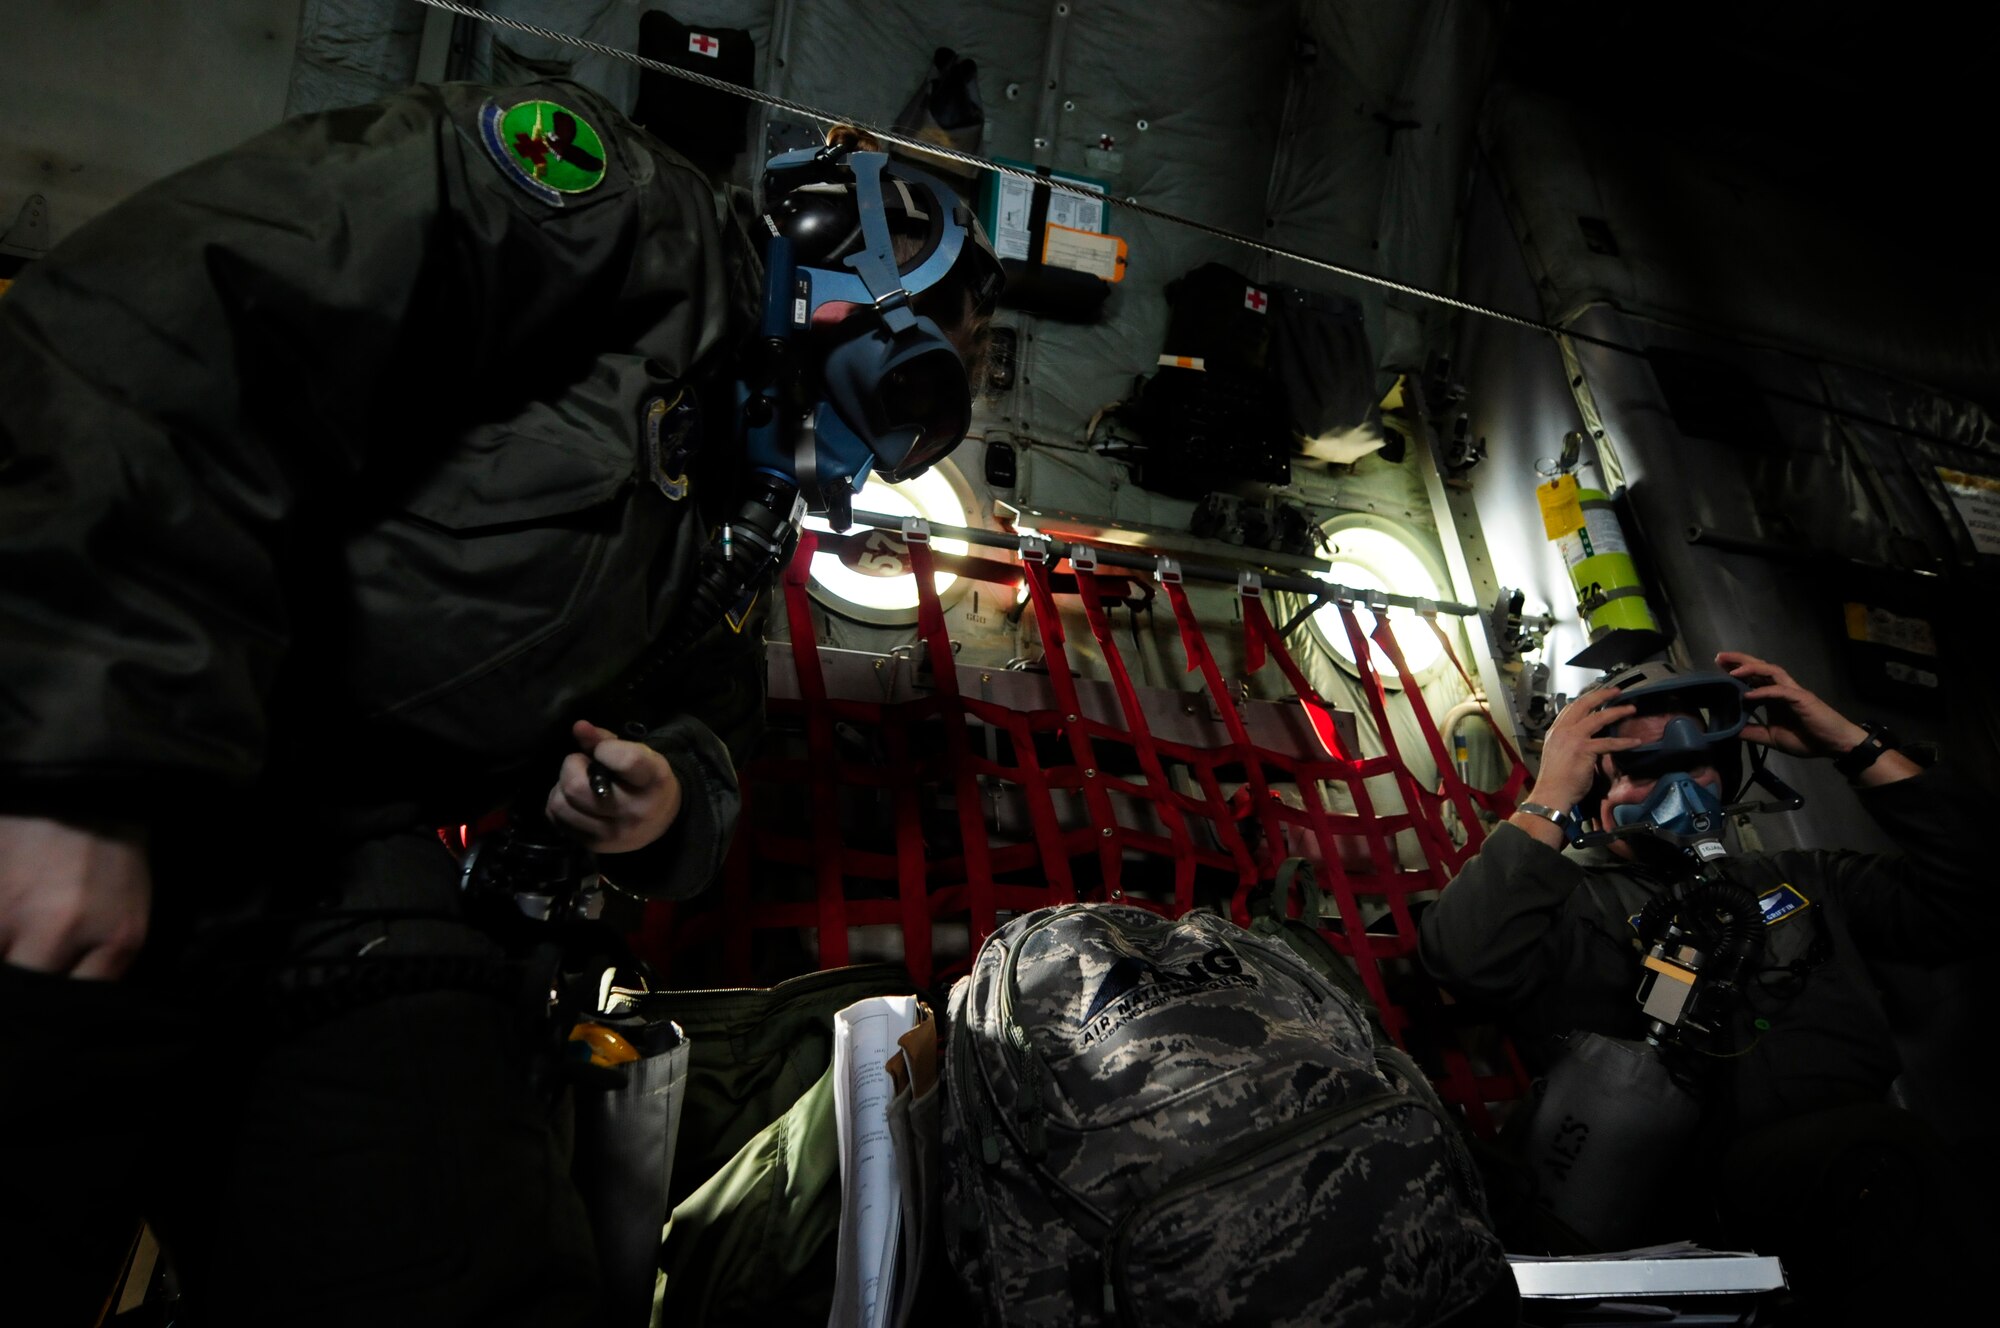 U.S. Air Force Senior Airman Brittany Callahan (left) and 1st Lt. Shawn Griffin (right) don oxygen masks as part of an emergency procedure during a scenario on an aeromedical training mission roundtrip from North Carolina Air National Guard Base, Charlotte Douglas Intl. Airport, Jan. 9, 2015. The training mission scenario is to transfer patients from Landstuhl Medical Center, Germany, to Malcolm Grove Medical Center, Md. (U.S. Air National Guard photo by Staff Sgt. Julianne M. Showalter, 145th Public Affairs/ Released)